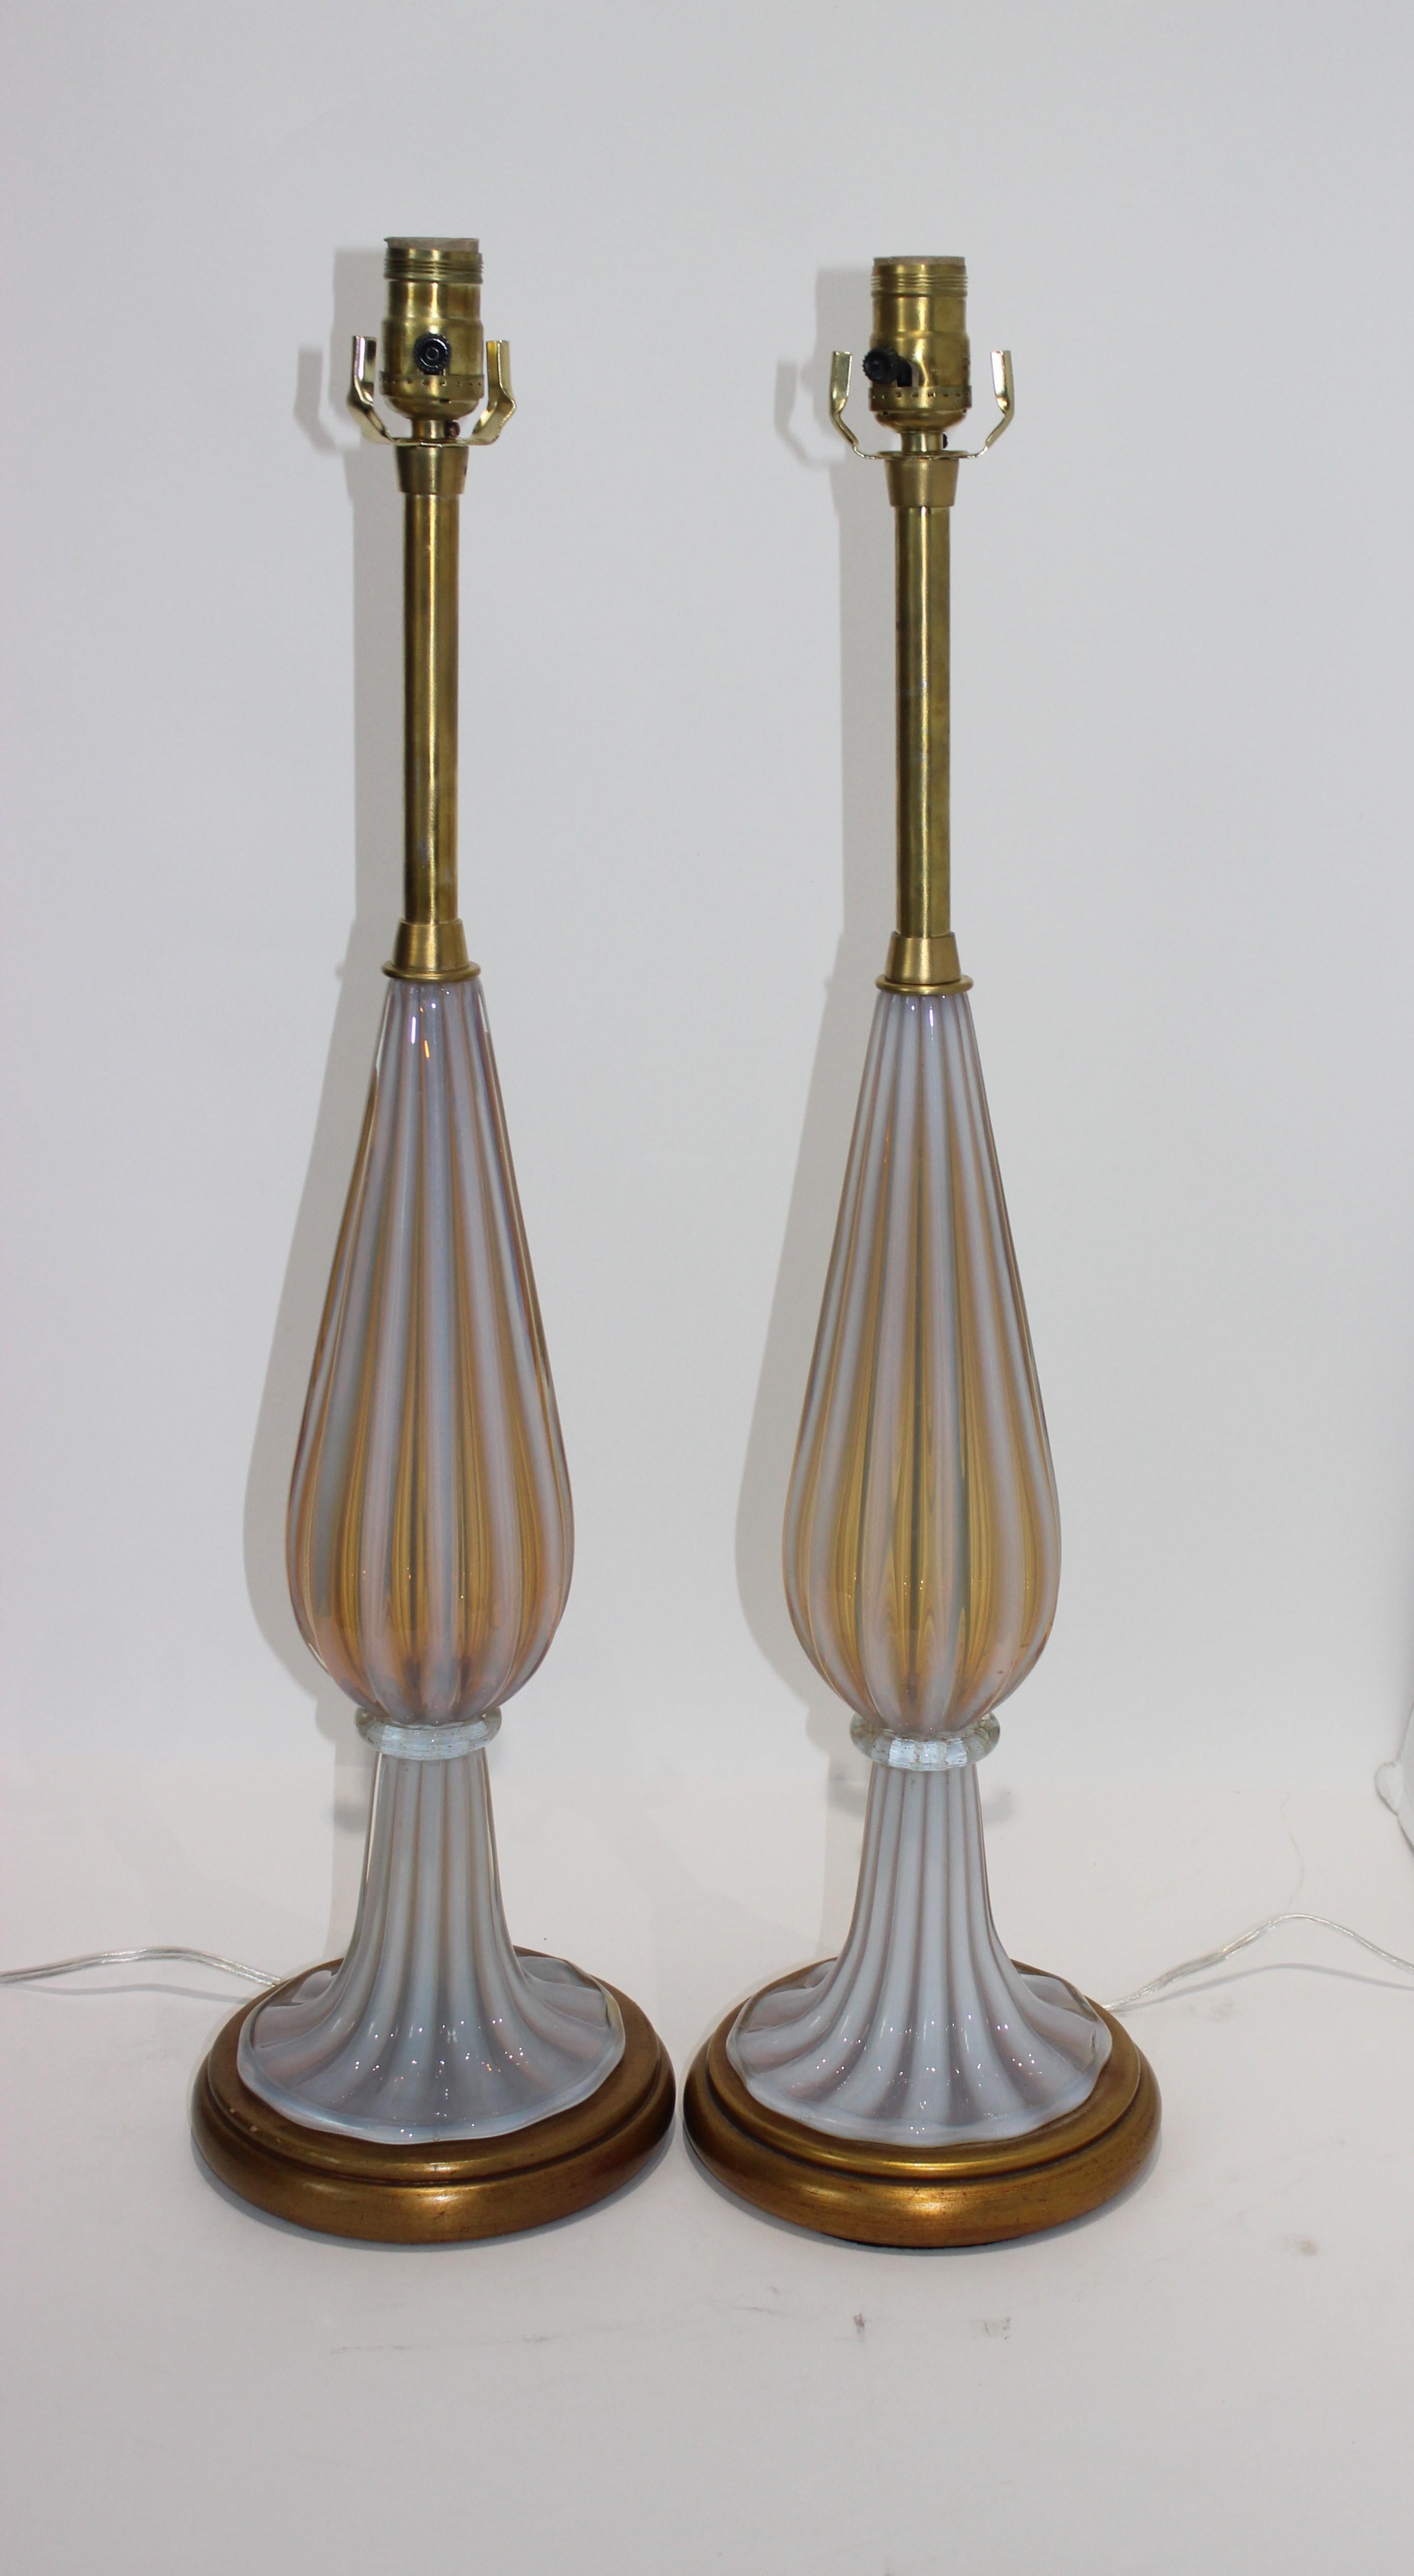 This stylish pair Marbro table lamps were created by Seguso (Murano Glass) for the Marbro Lamp Company and they date to the 1960s.  

Note:  The pair has been rewired and new sockets.  

Note:  Height to top of socket is 27.75